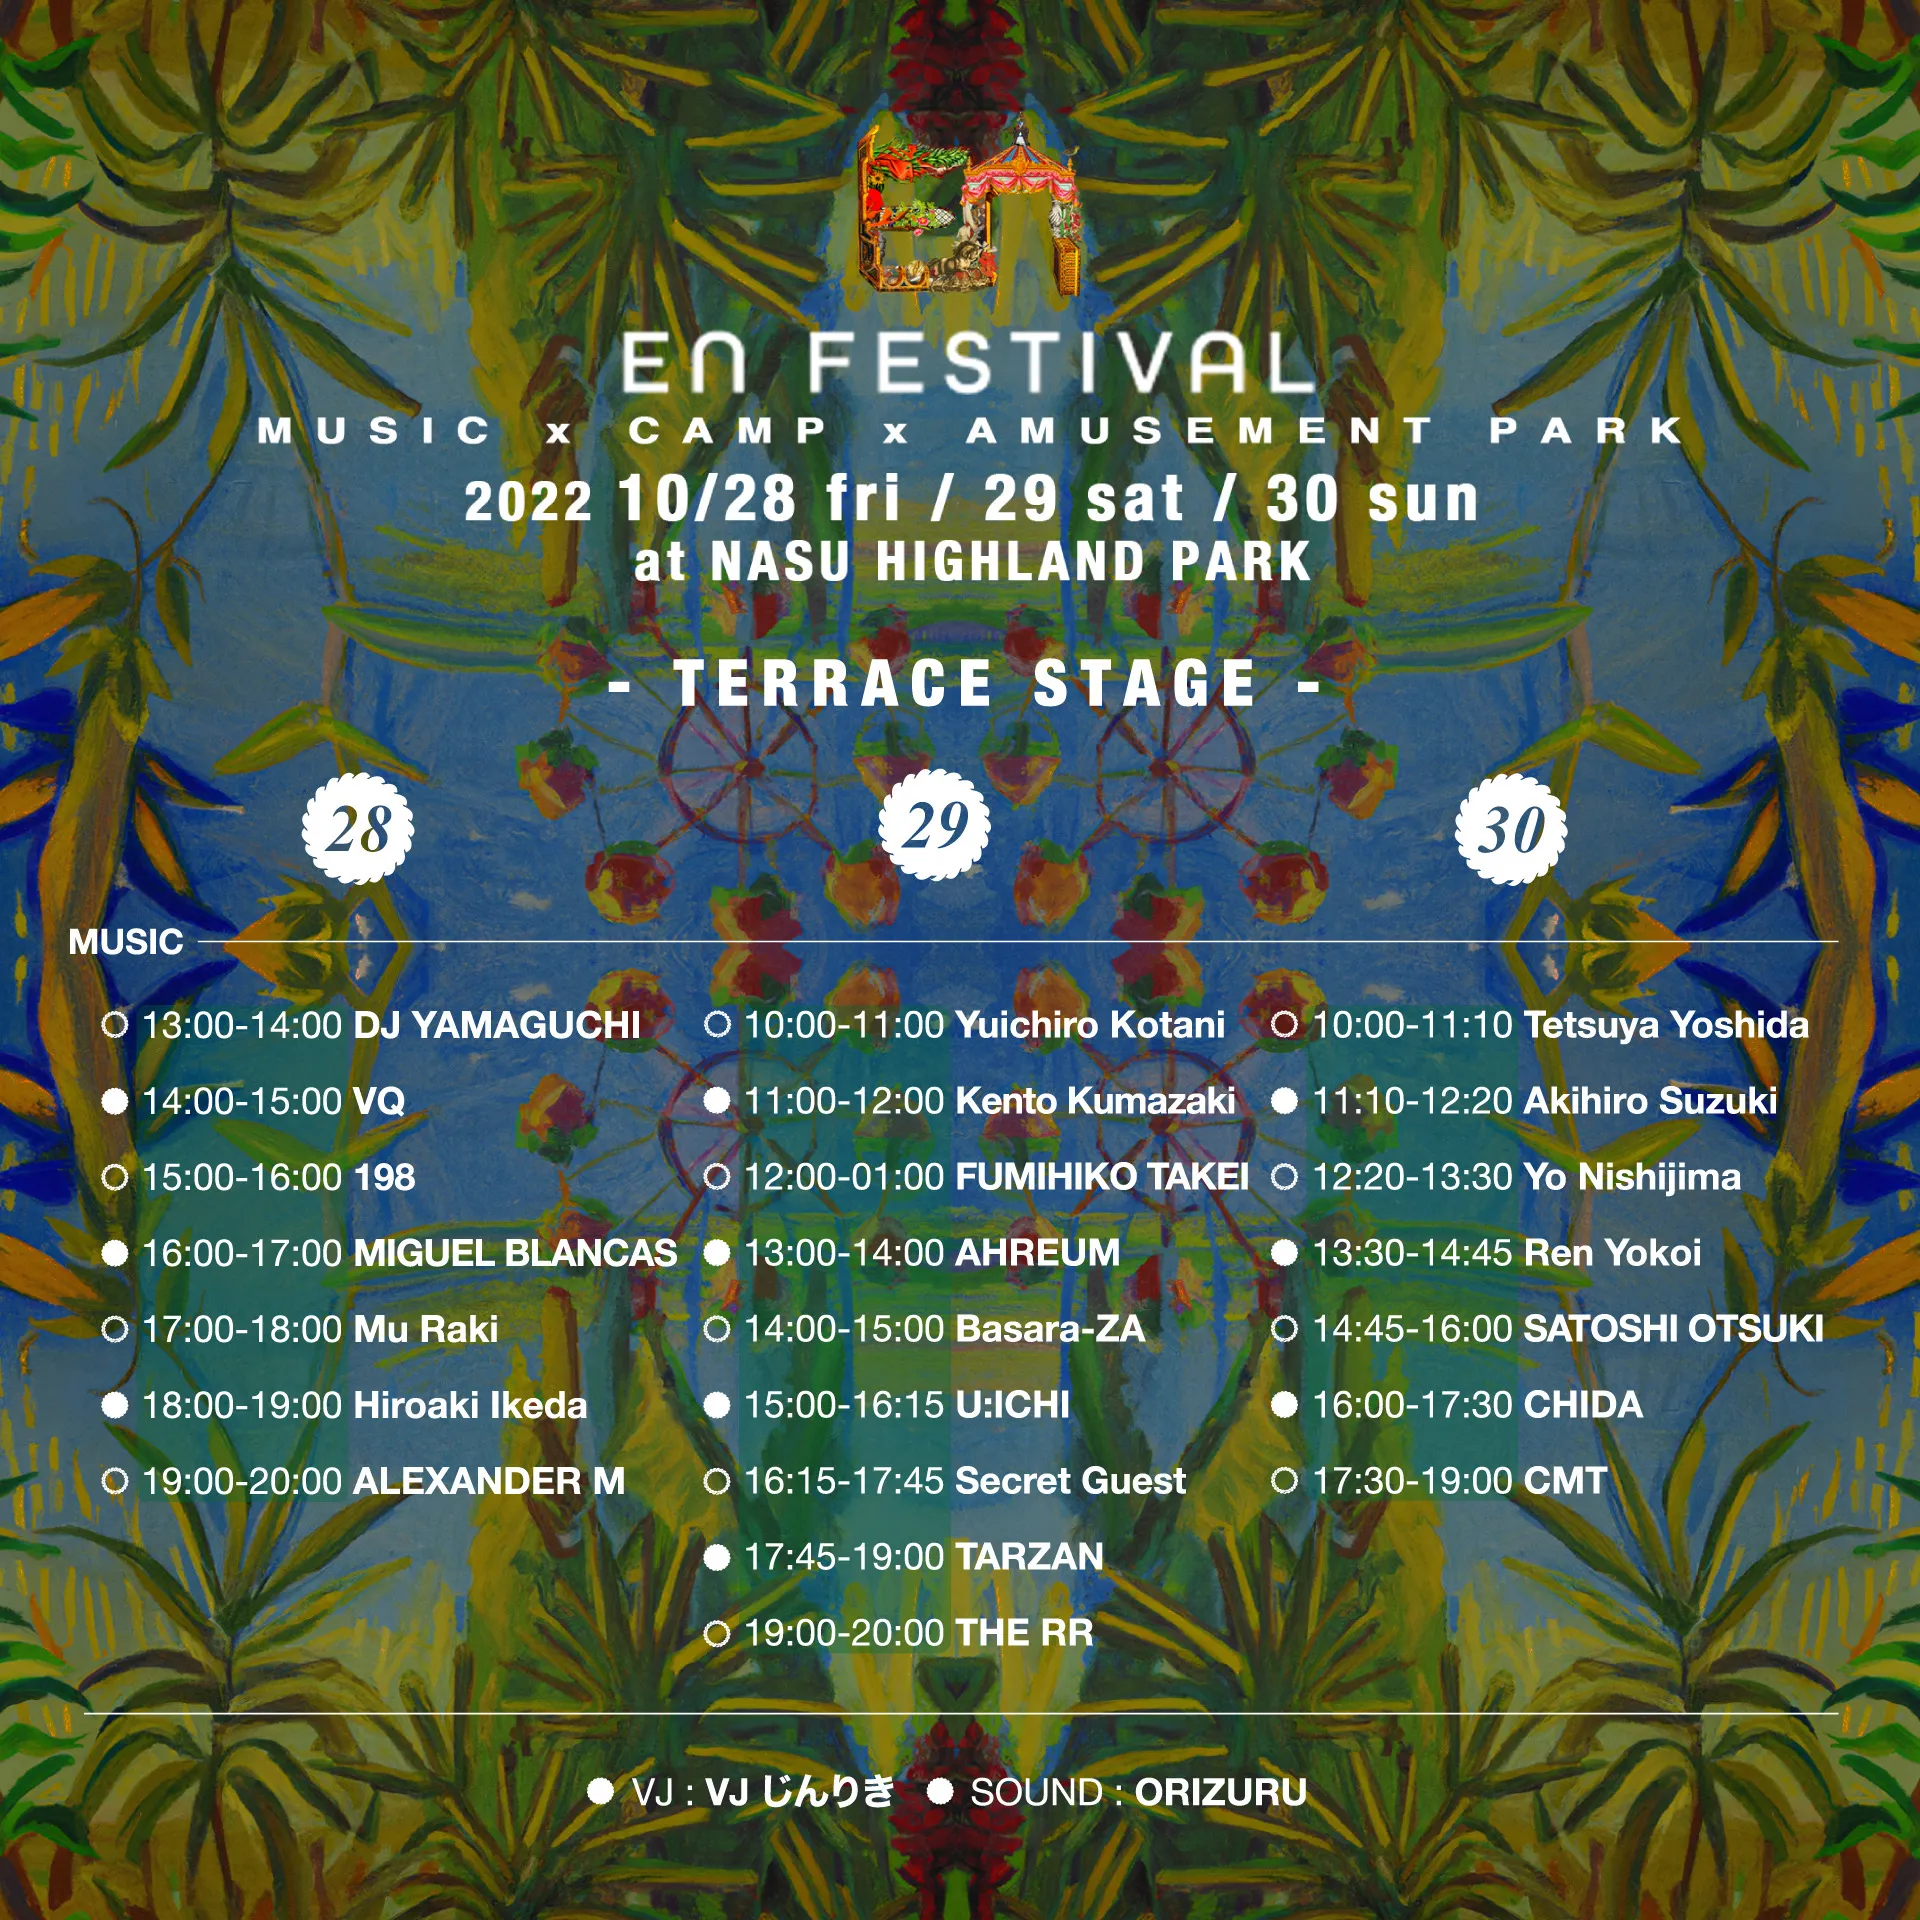 TERRACE STAGE